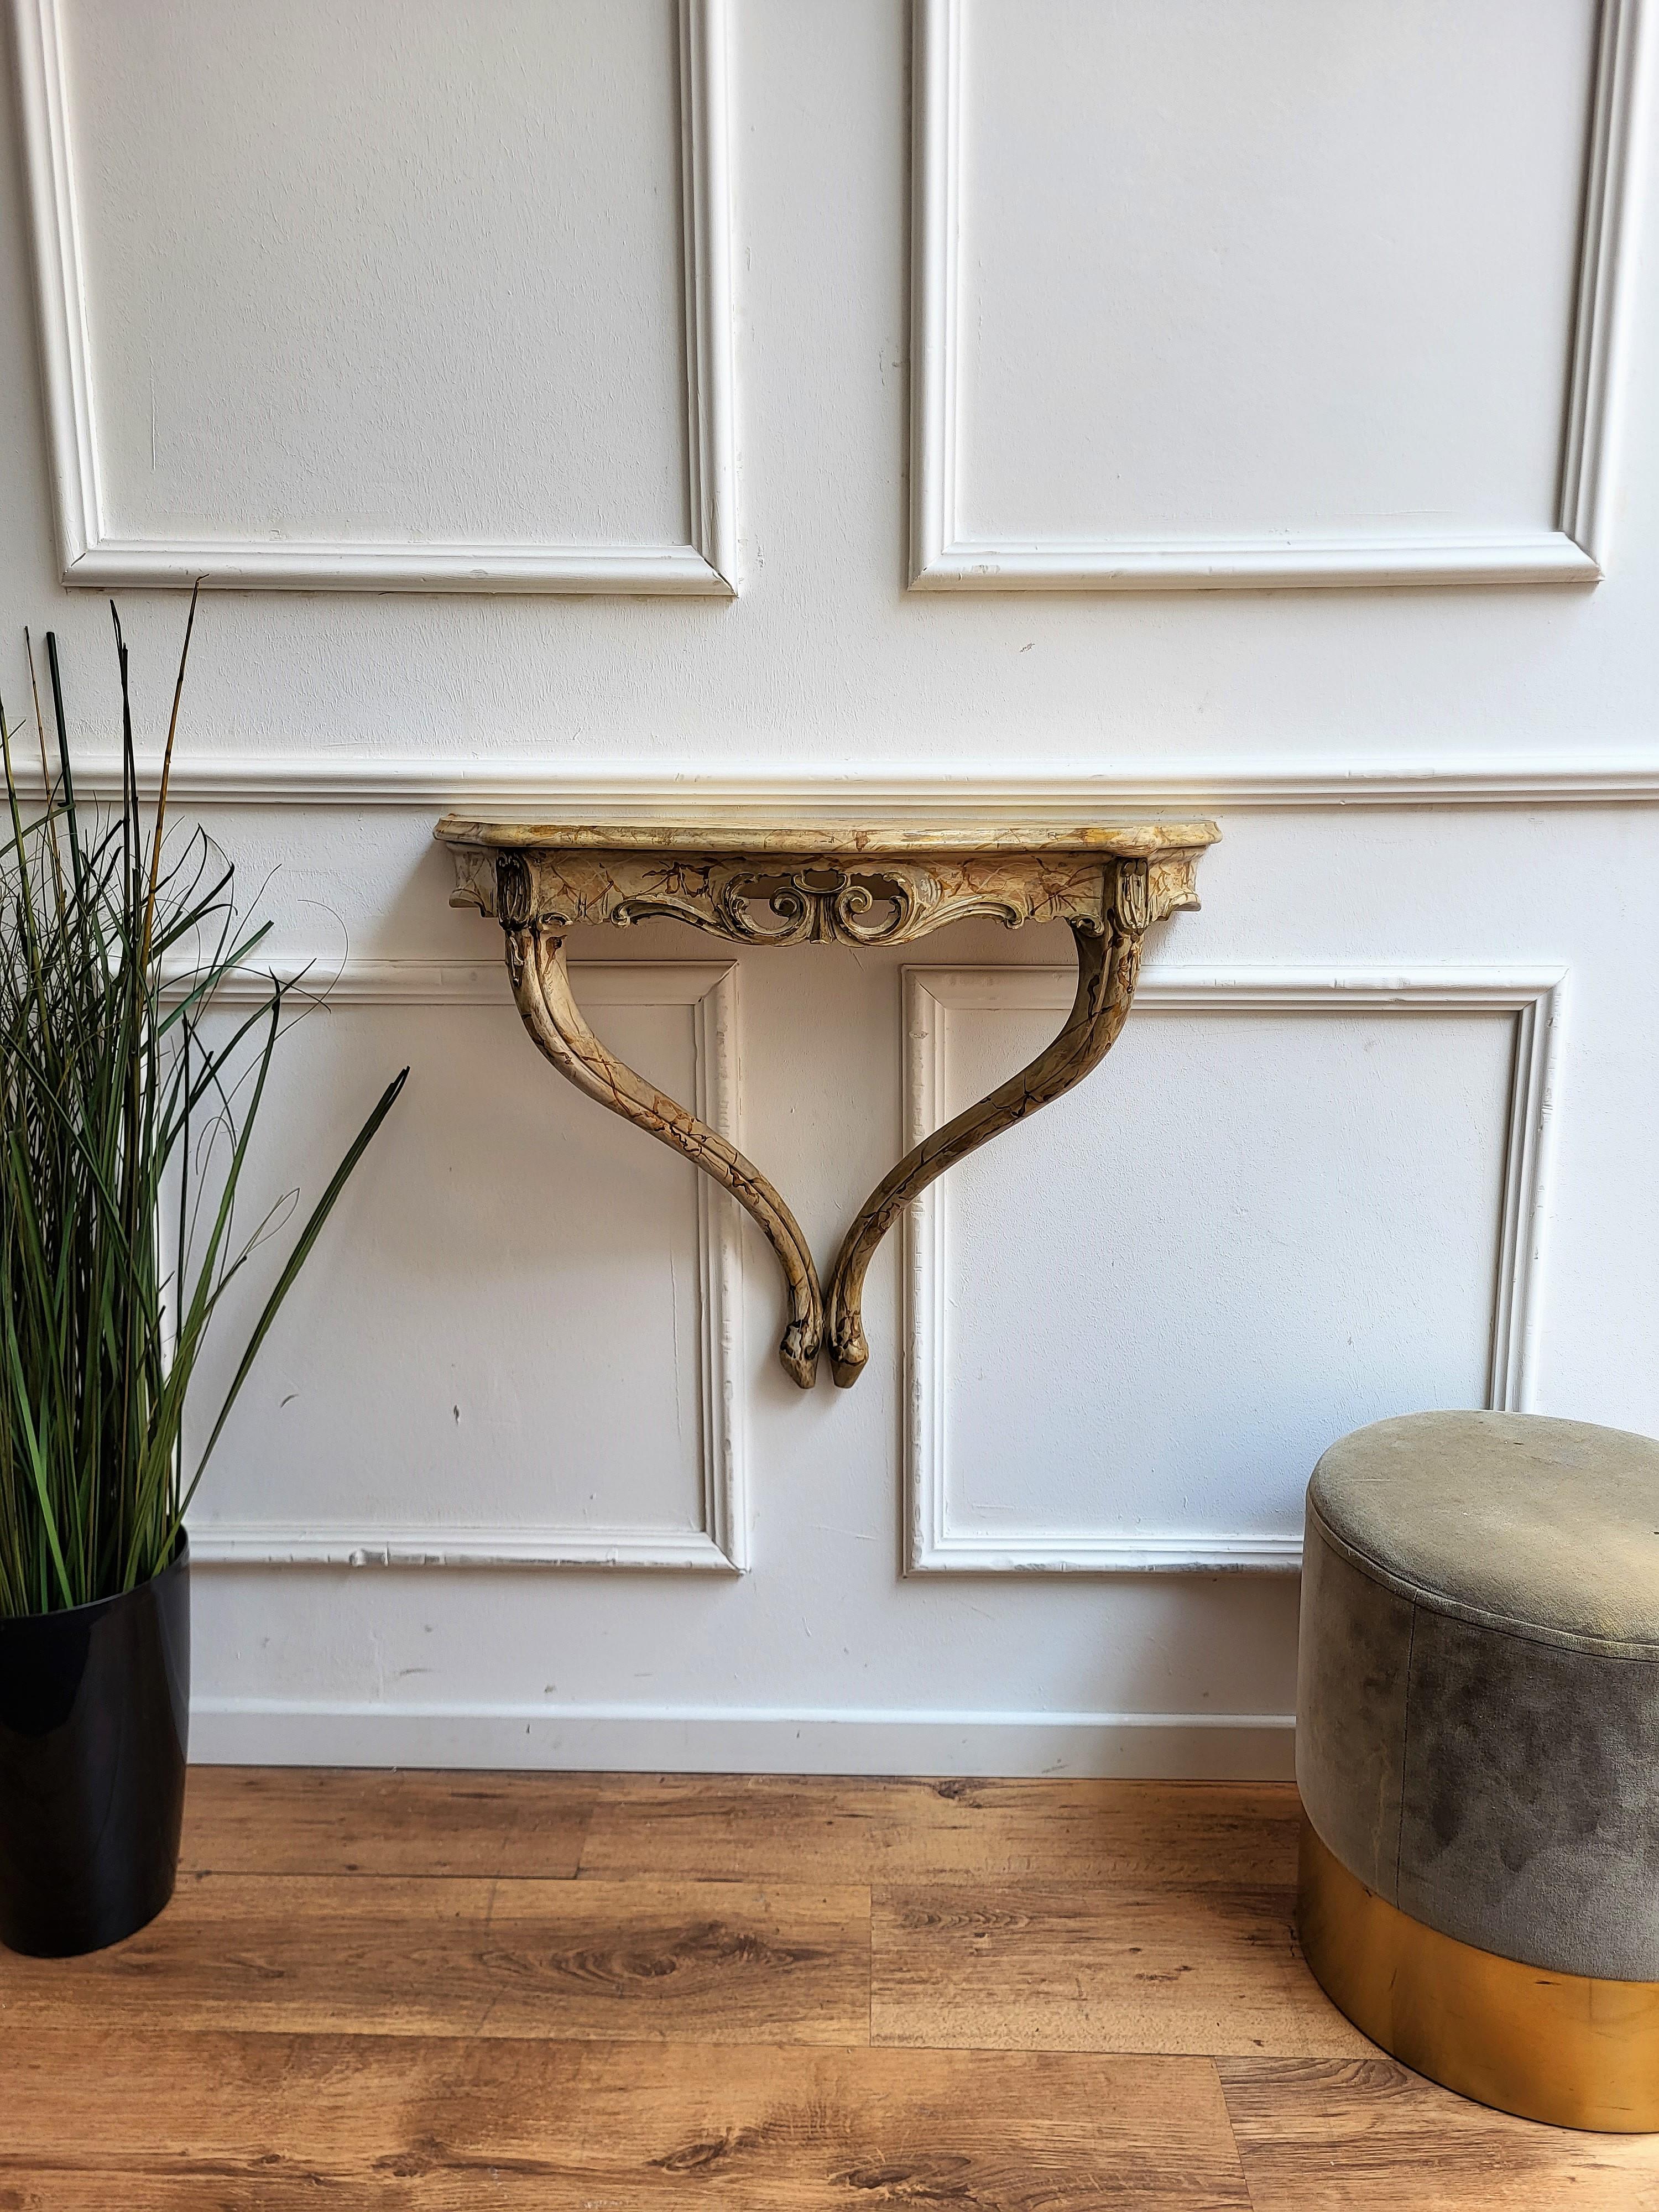 Beautiful 1960s Italian Baroque Rococo Revival wall console table or shelf painted in marble decorated effect and carved cliassic figures, perfect in any entrance, hallway as well as in any other room as extra holding shelf. The console table is